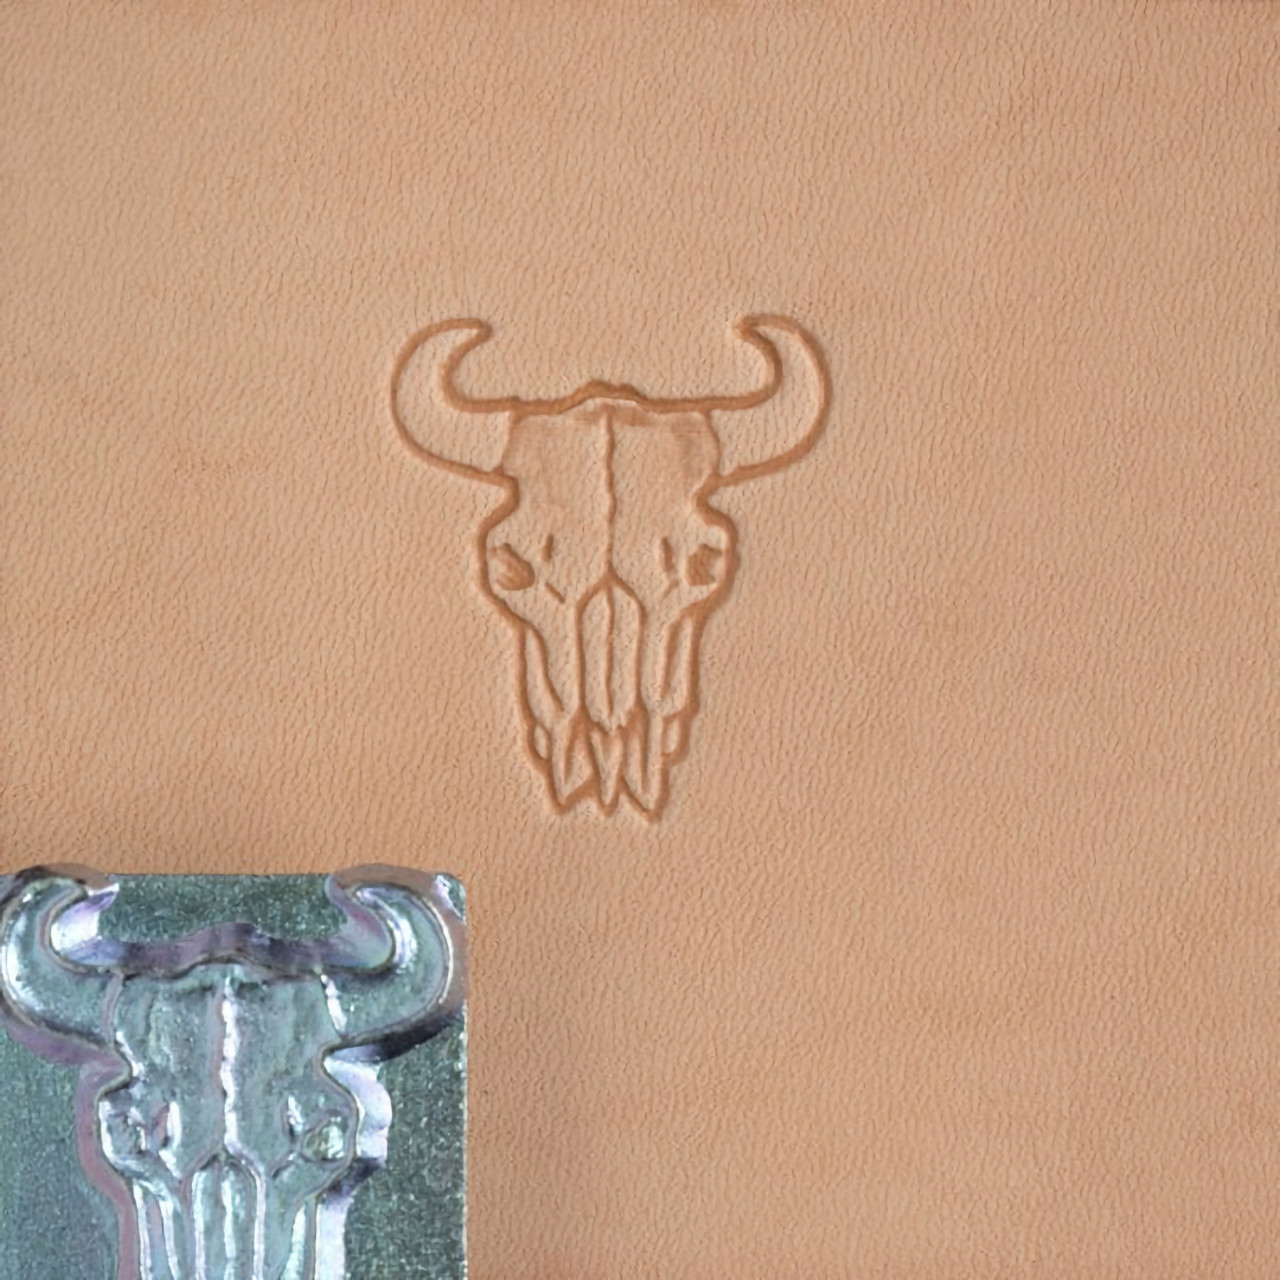 Buffalo skull leather stamp with its impression.